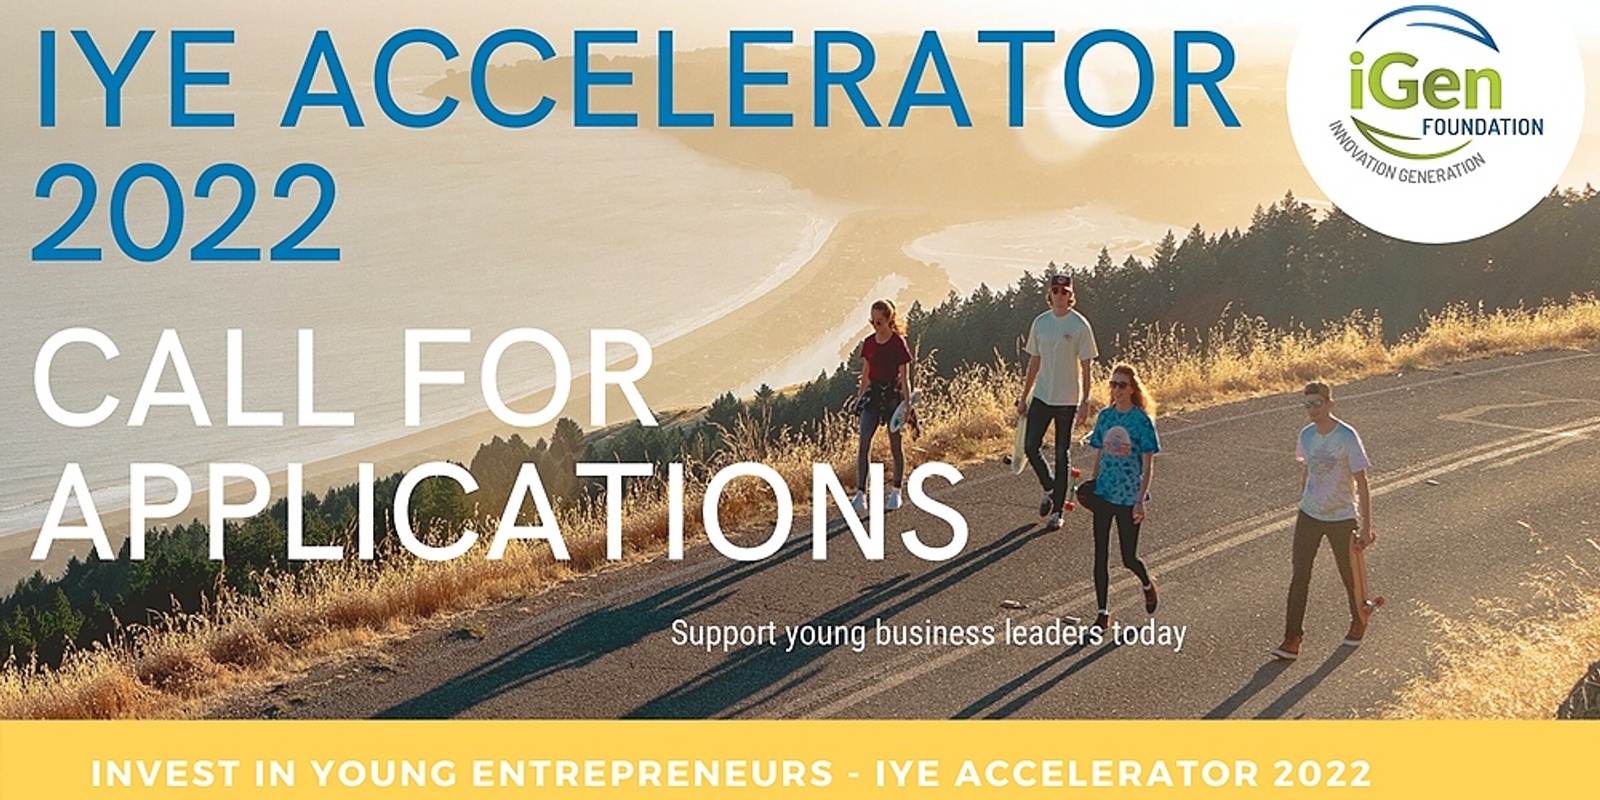 Invest in a Young Entrepreneur - call for applications